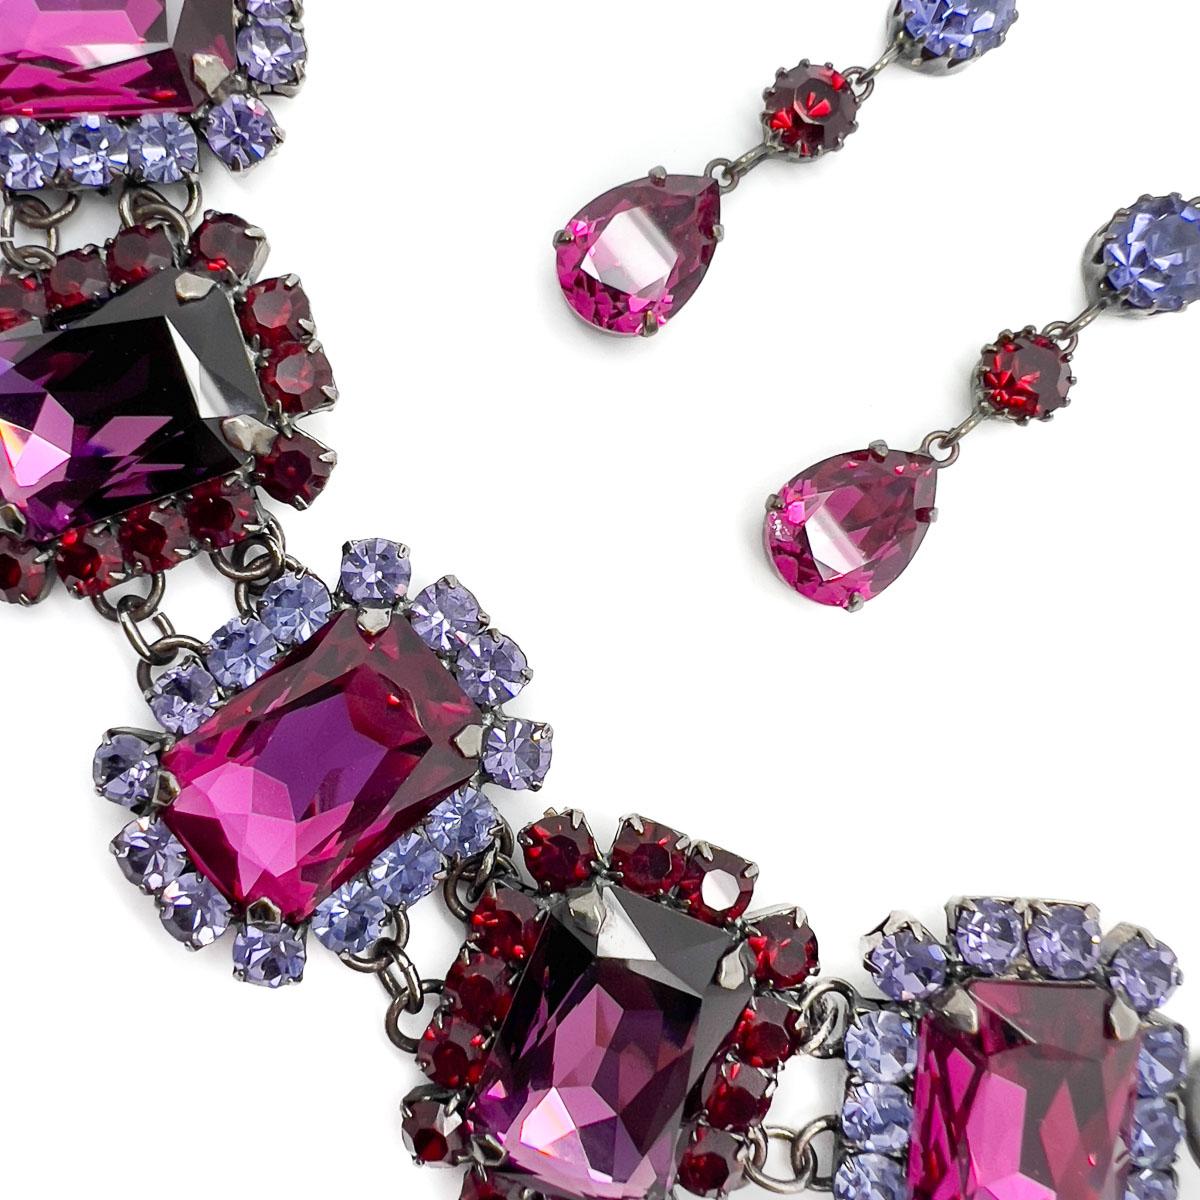 A magnificent Vintage Hot Pink Bracelet with matching drop earrings. Huge, lavish crystals in hot pink create a show stopping Schiaparelli style impact. The earrings perfectly proportioned, leaving the bracelet to steal the show whilst adorning your